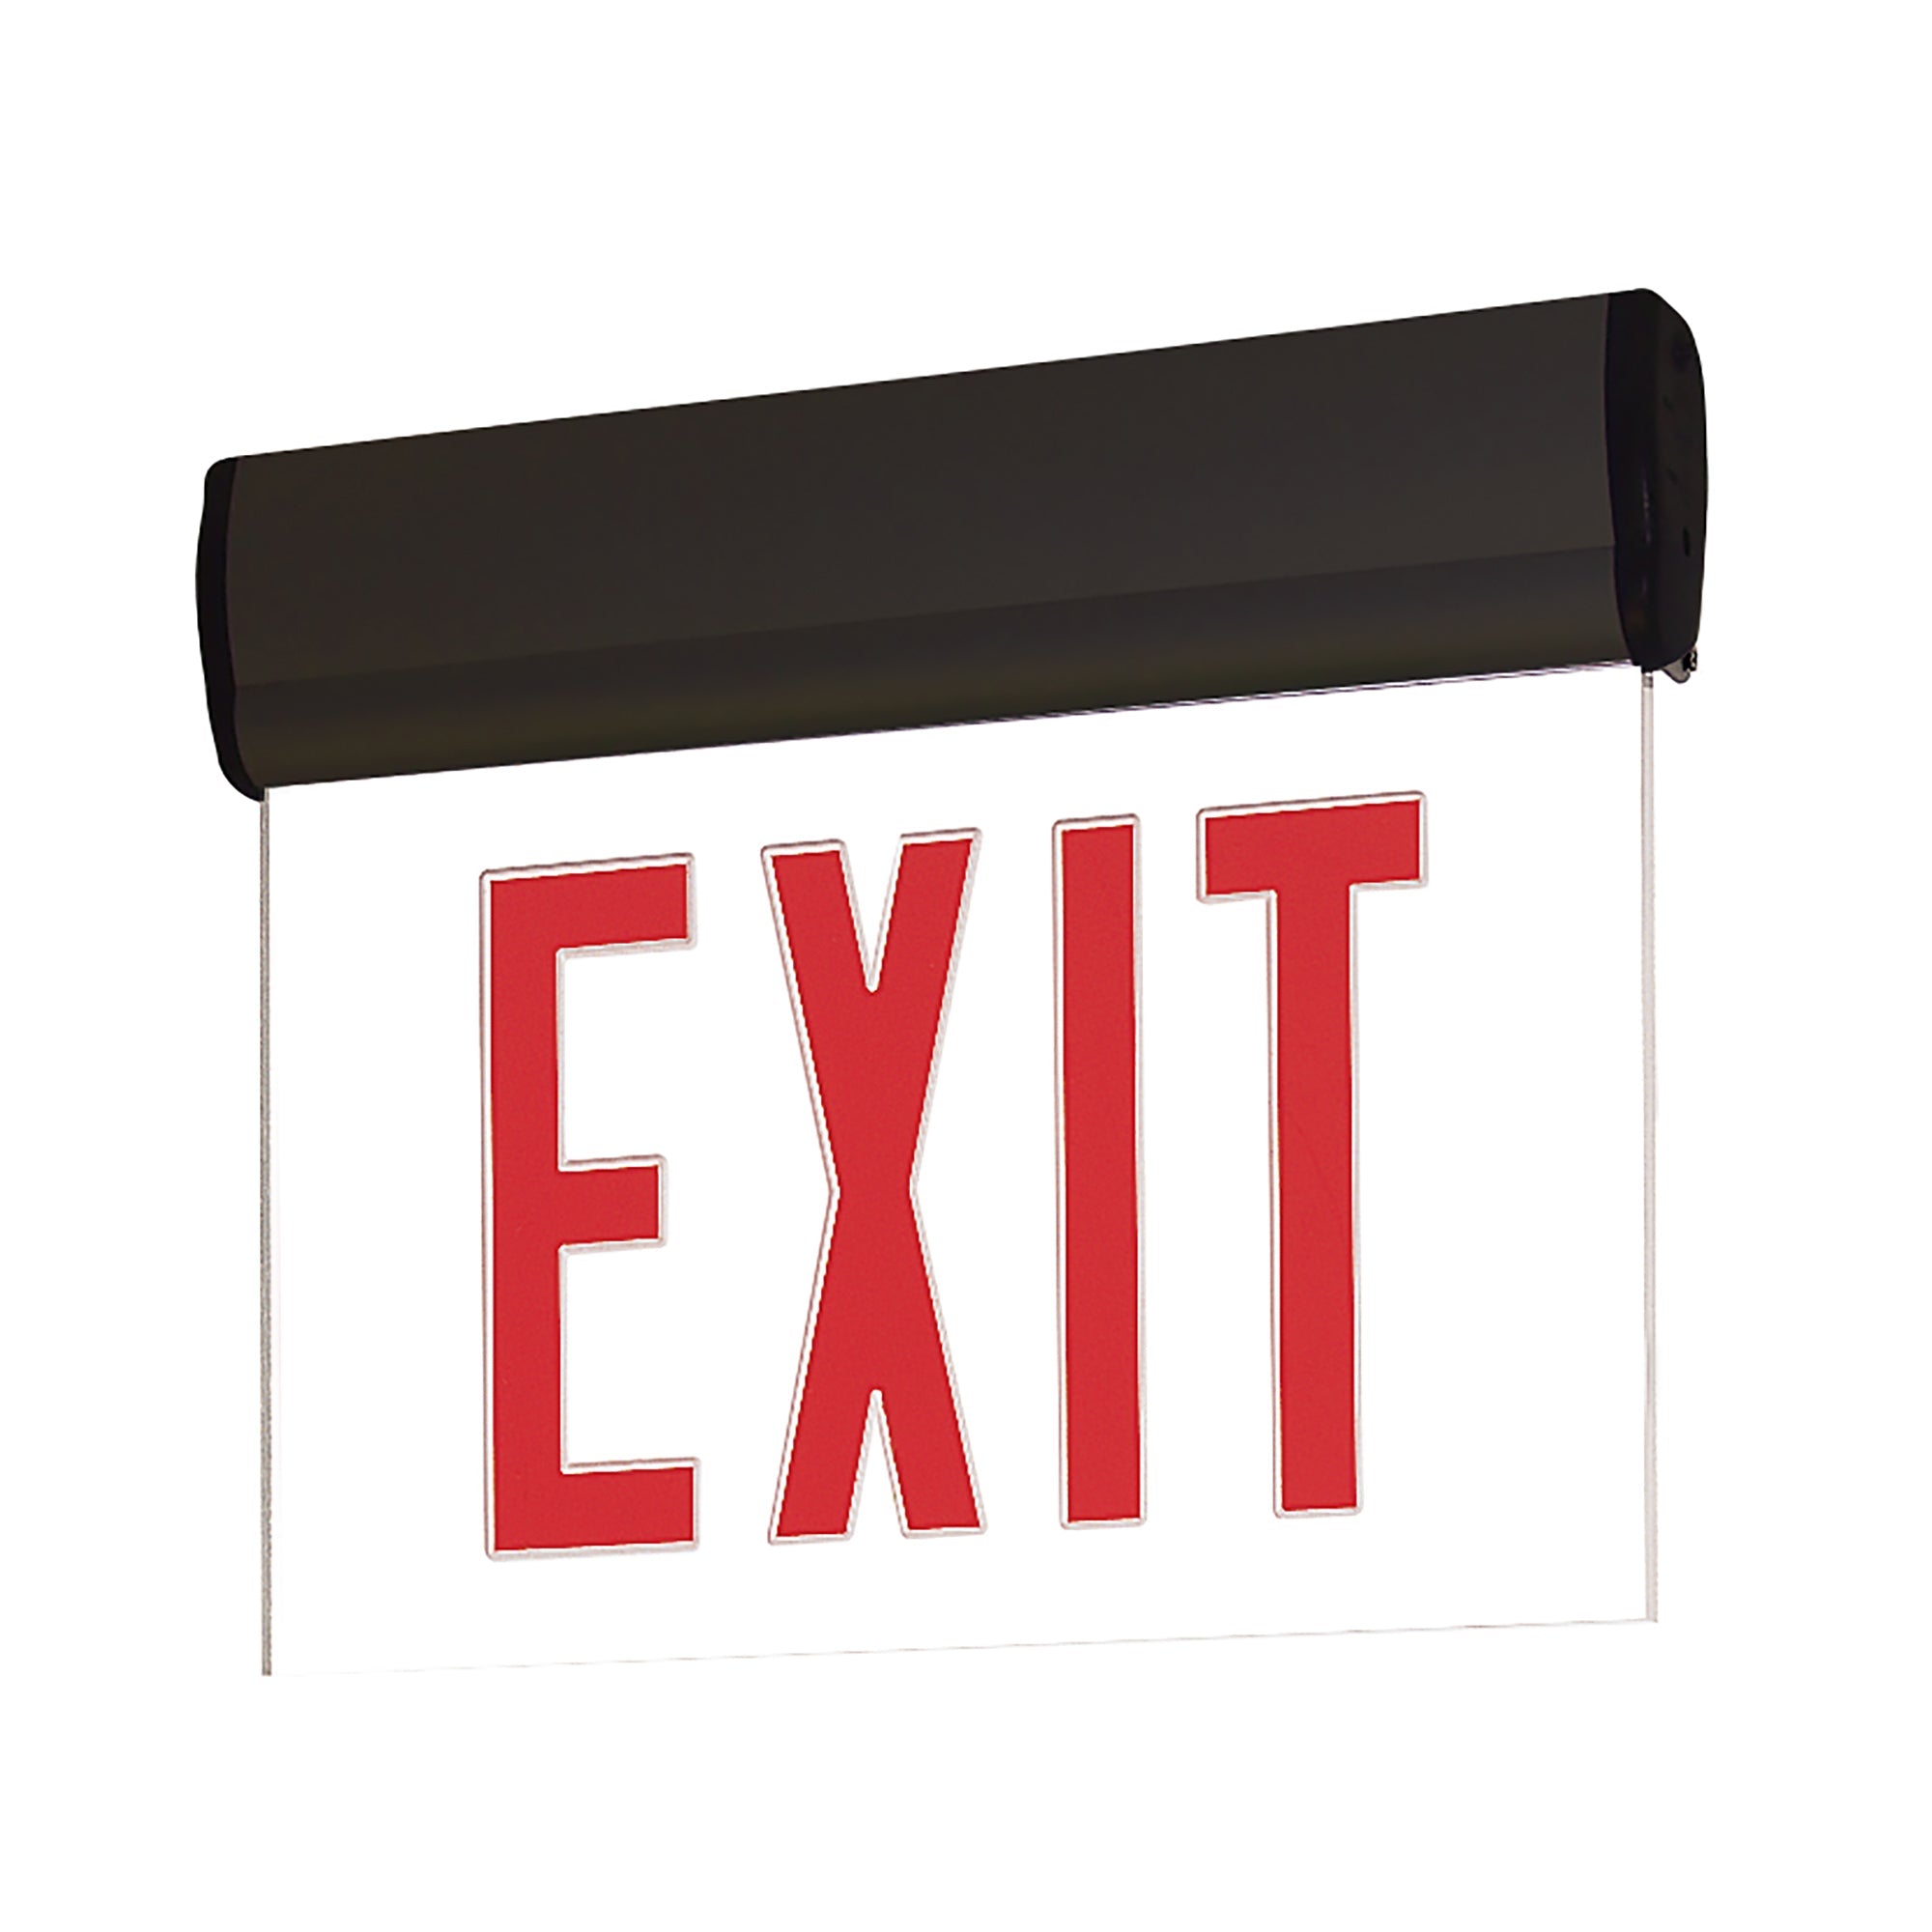 Nora Lighting NX-810-LEDRCB - Exit / Emergency - Surface Adjustable LED Edge-Lit Exit Sign, AC only, 6 Inch Red Letters, Single Face / Clear Acrylic, Black Housing